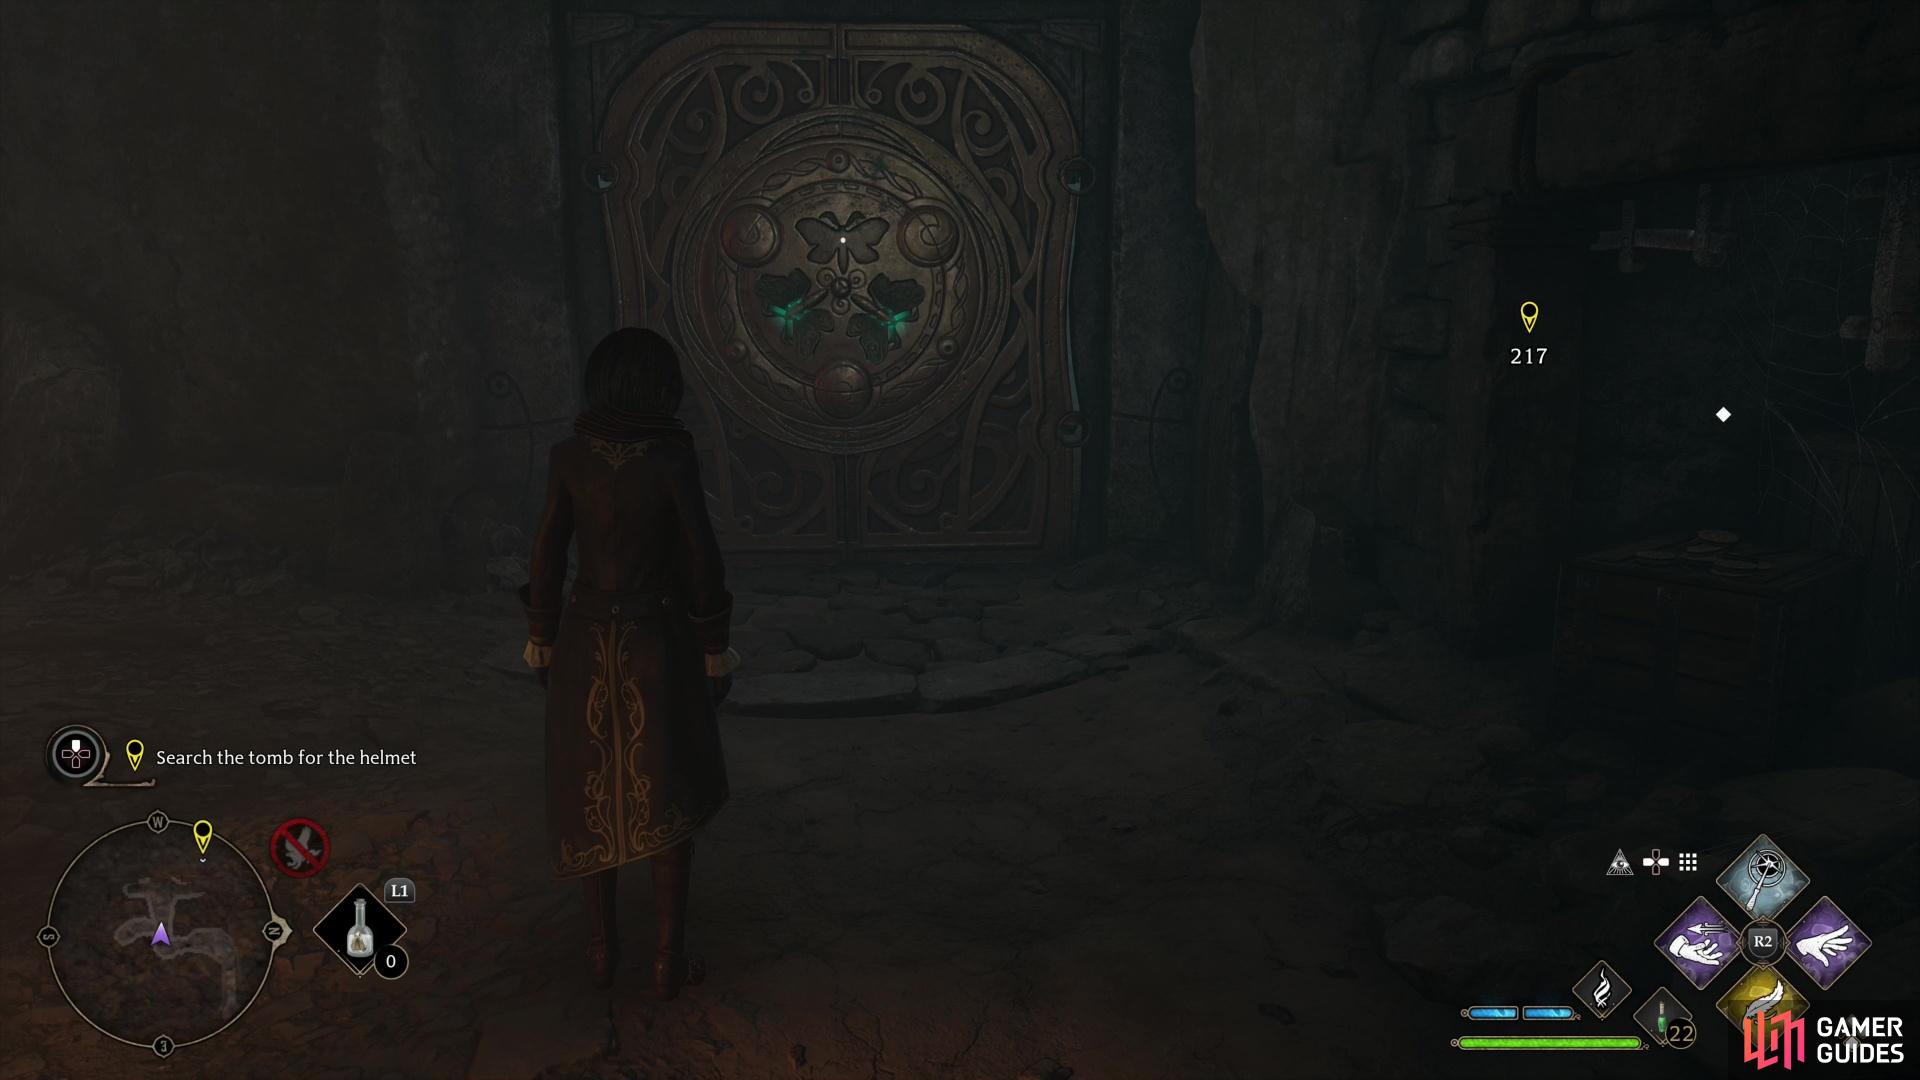 The main barrier to progress in the witch's tomb are sealed moth doors.